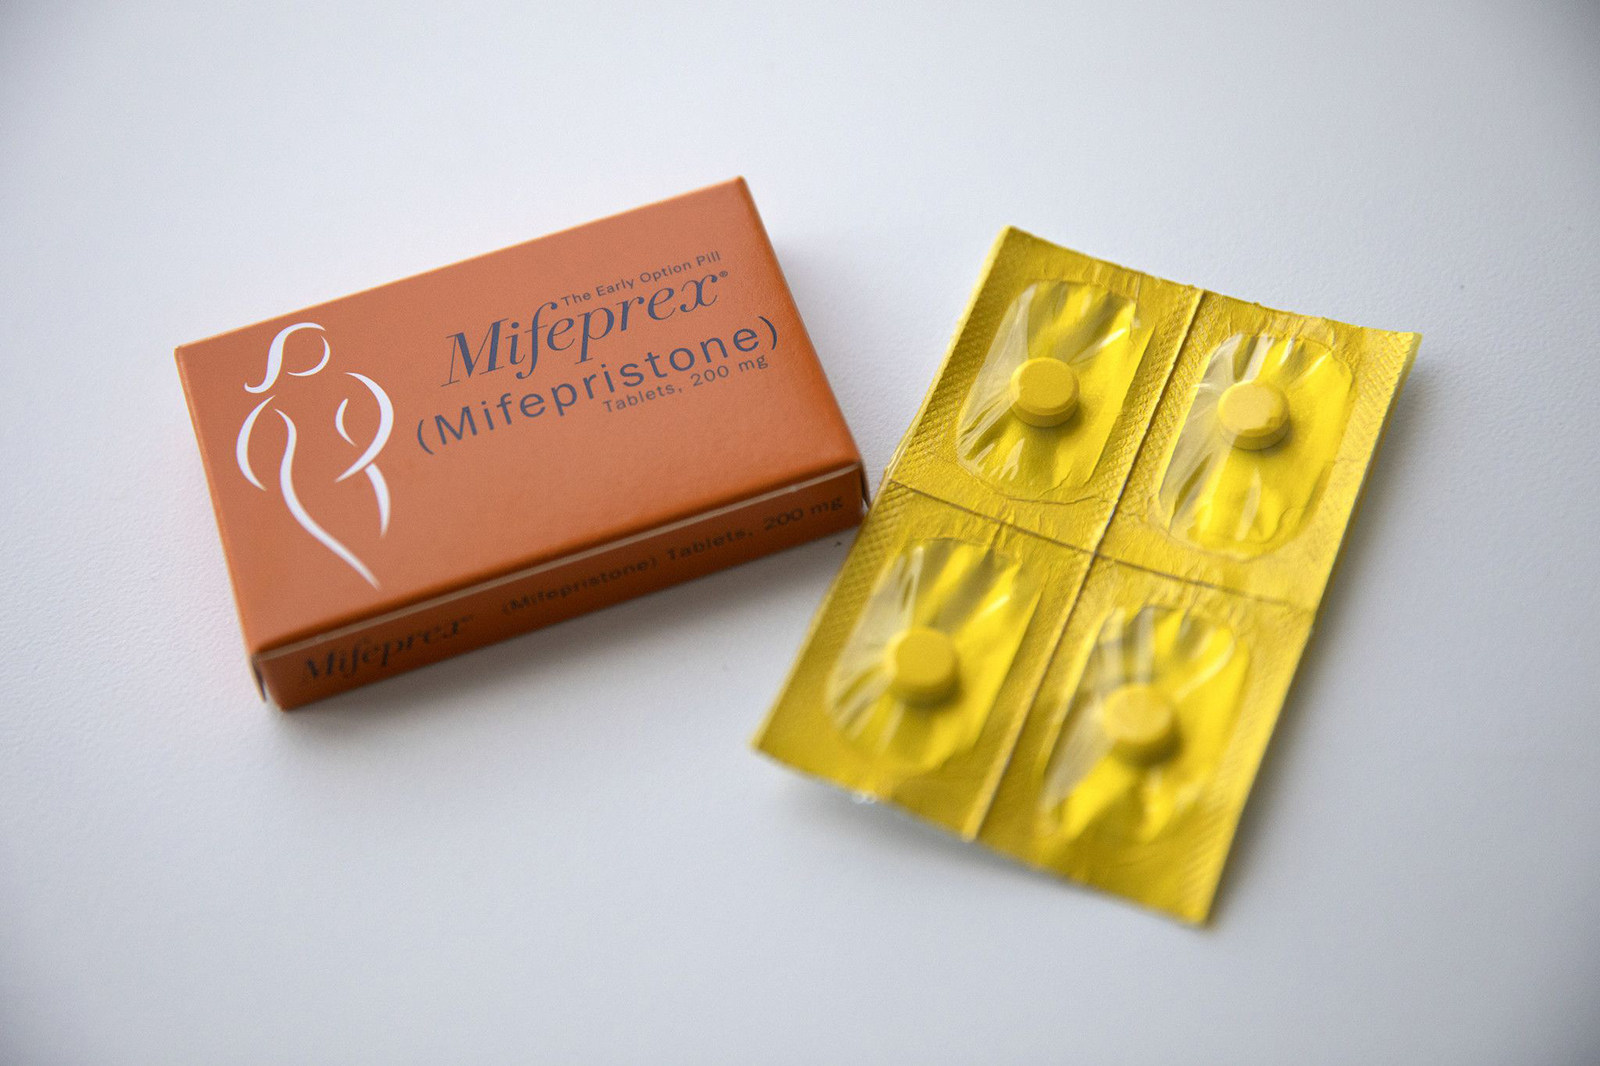 Under Moroccan law, abortion is only allowed if a pregnancy is cause for imminent danger to a woman’s health, which has led to a thriving illicit online pills market to help women end their pregnancies. Photo: TNS
